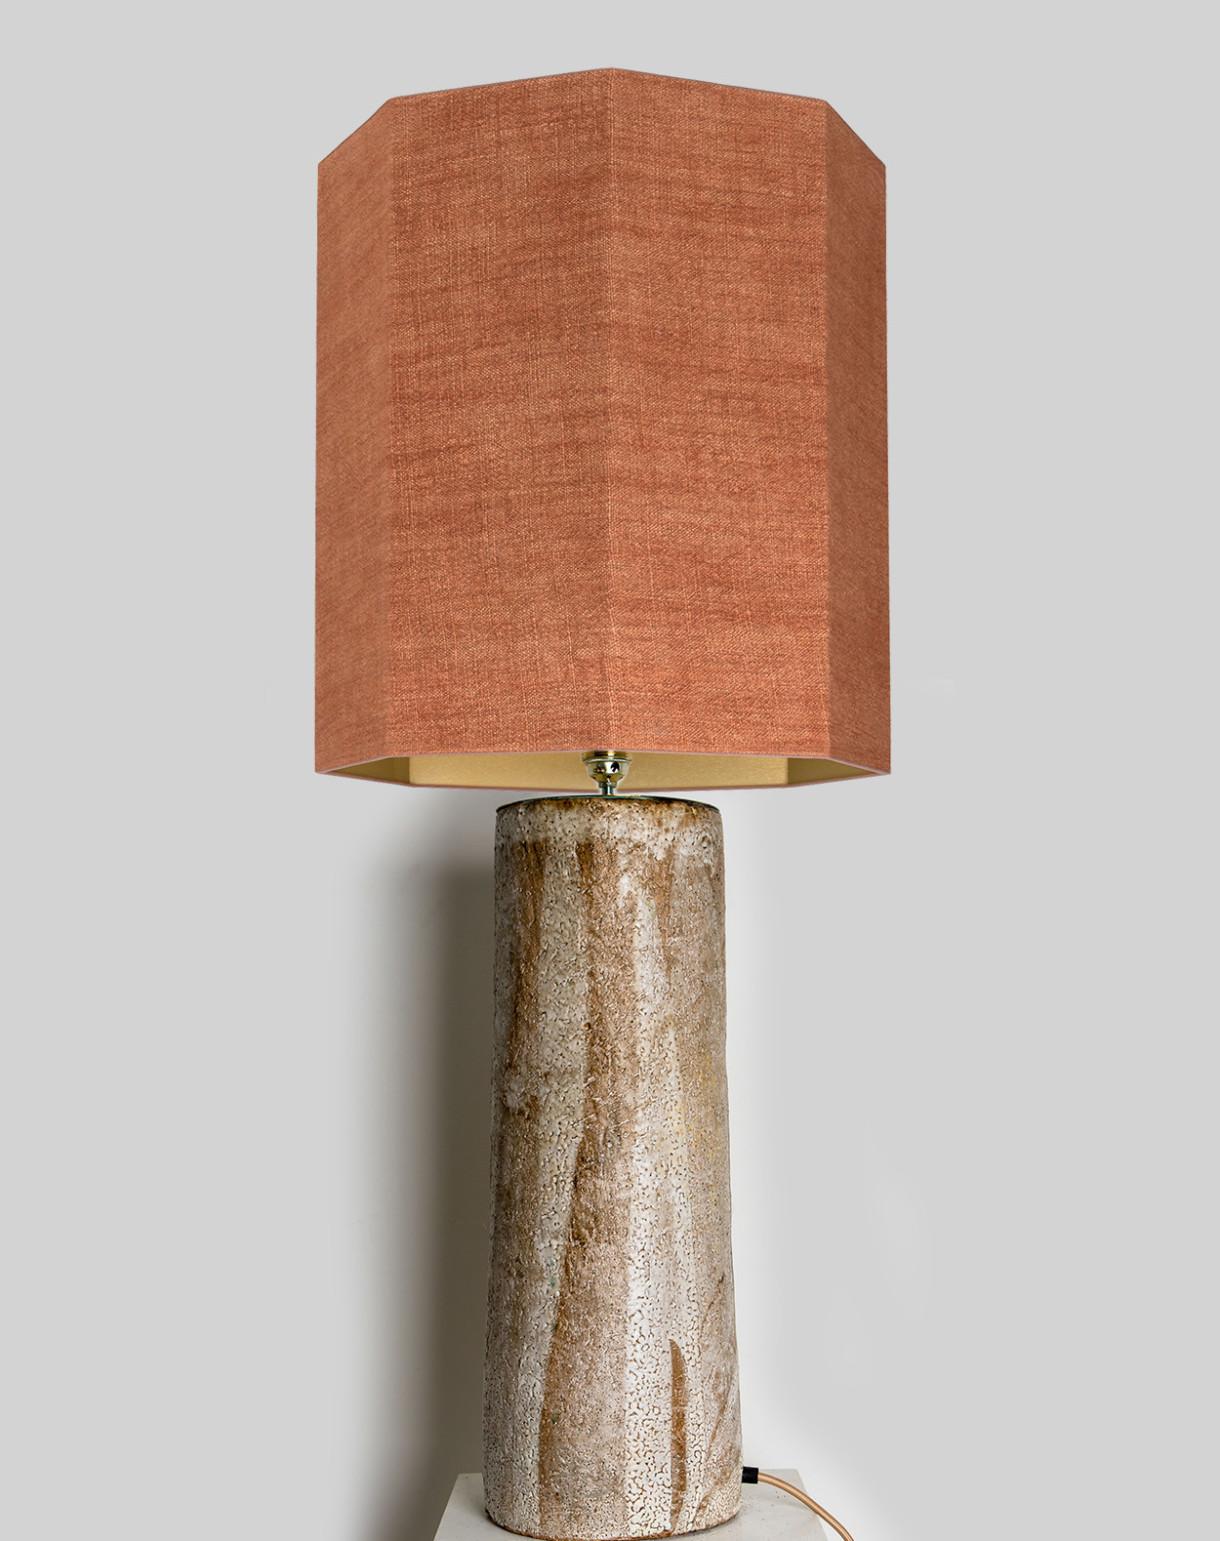 A rare large ceramic table lamp from Mid-20th Century. Sculptural piece, made of handmade ceramic elements in natural tones. With a special custom made lamp shade by René Houben. Brique color with a warm bronze inner-shade.

The lamp is in perfect